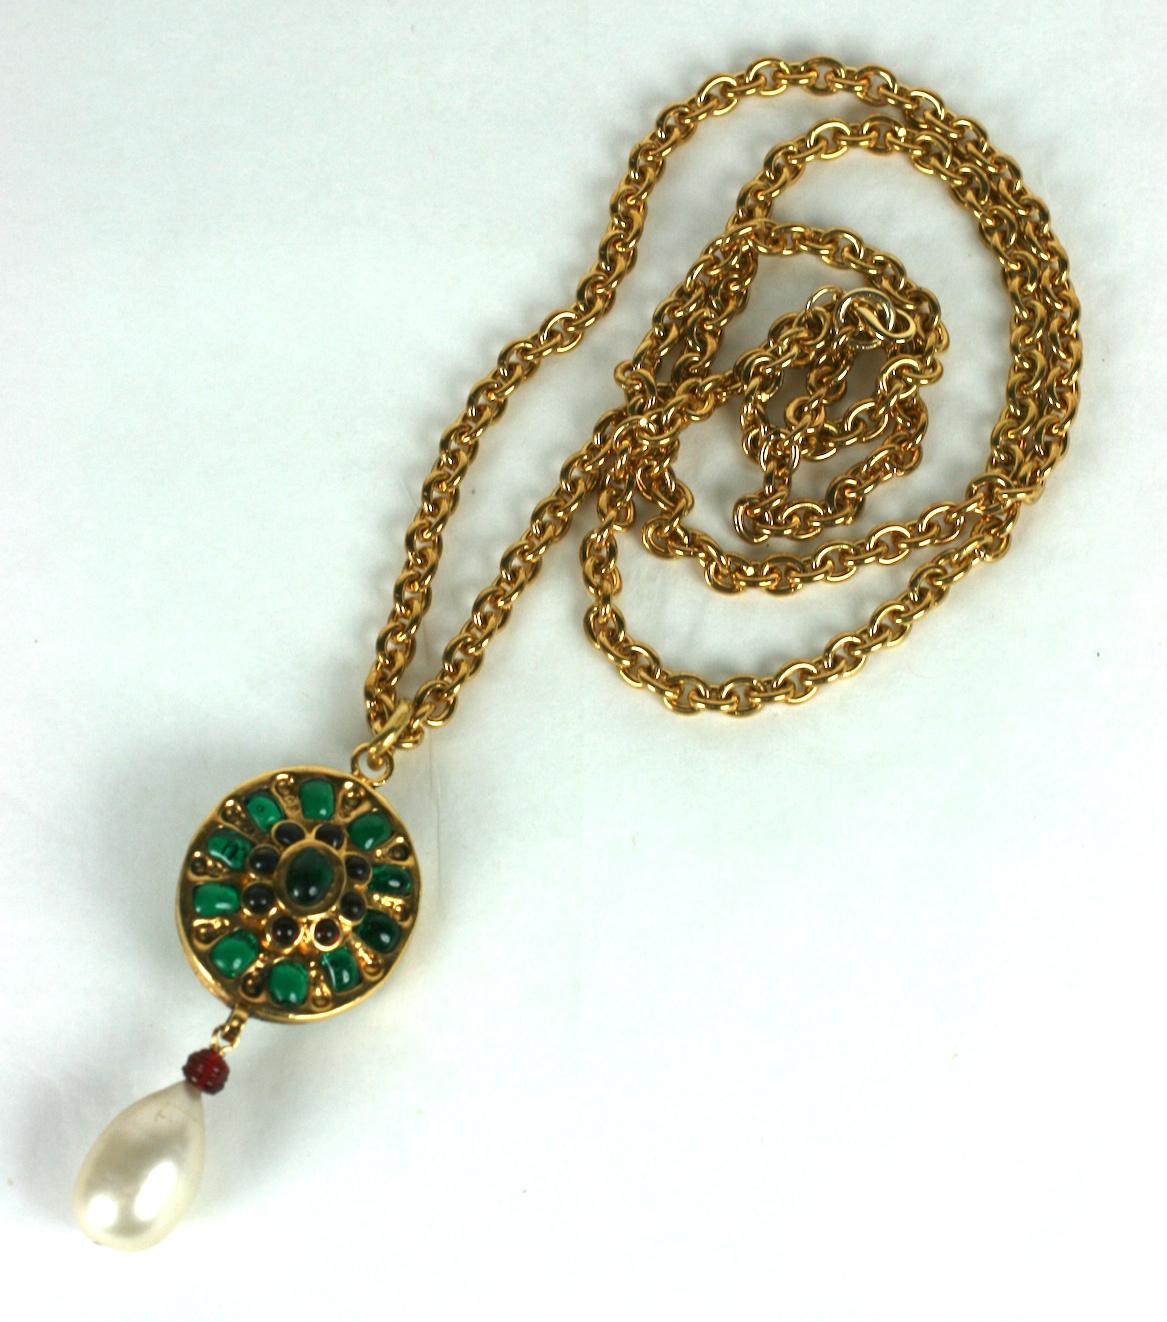 Chanel Renaissance Style Pendant from the 1980's hand made by Maison Gripoix. A reversible double sided oval pendant has poured glass work in emerald and ruby with a faux poured glass nacred pearl on a heavy gilt bronze chain. 
Unsigned runway